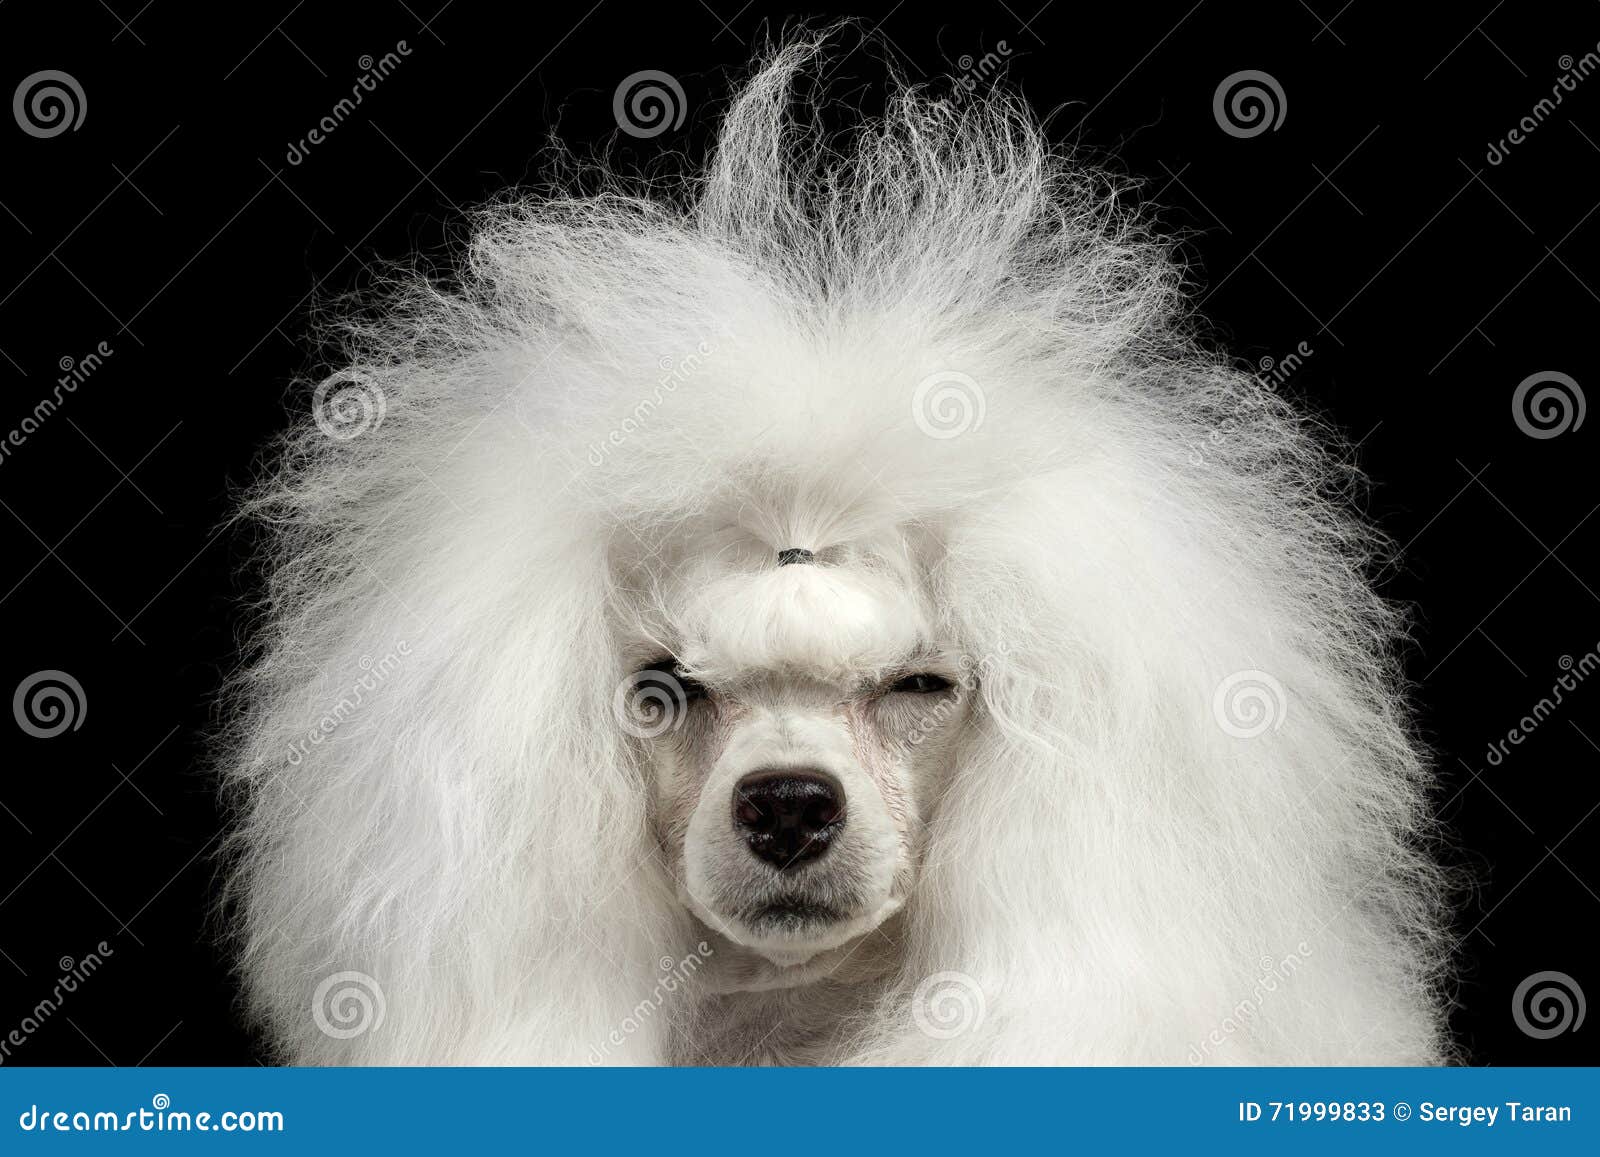 closeup shaggy poodle dog squinting looking in camera,  black